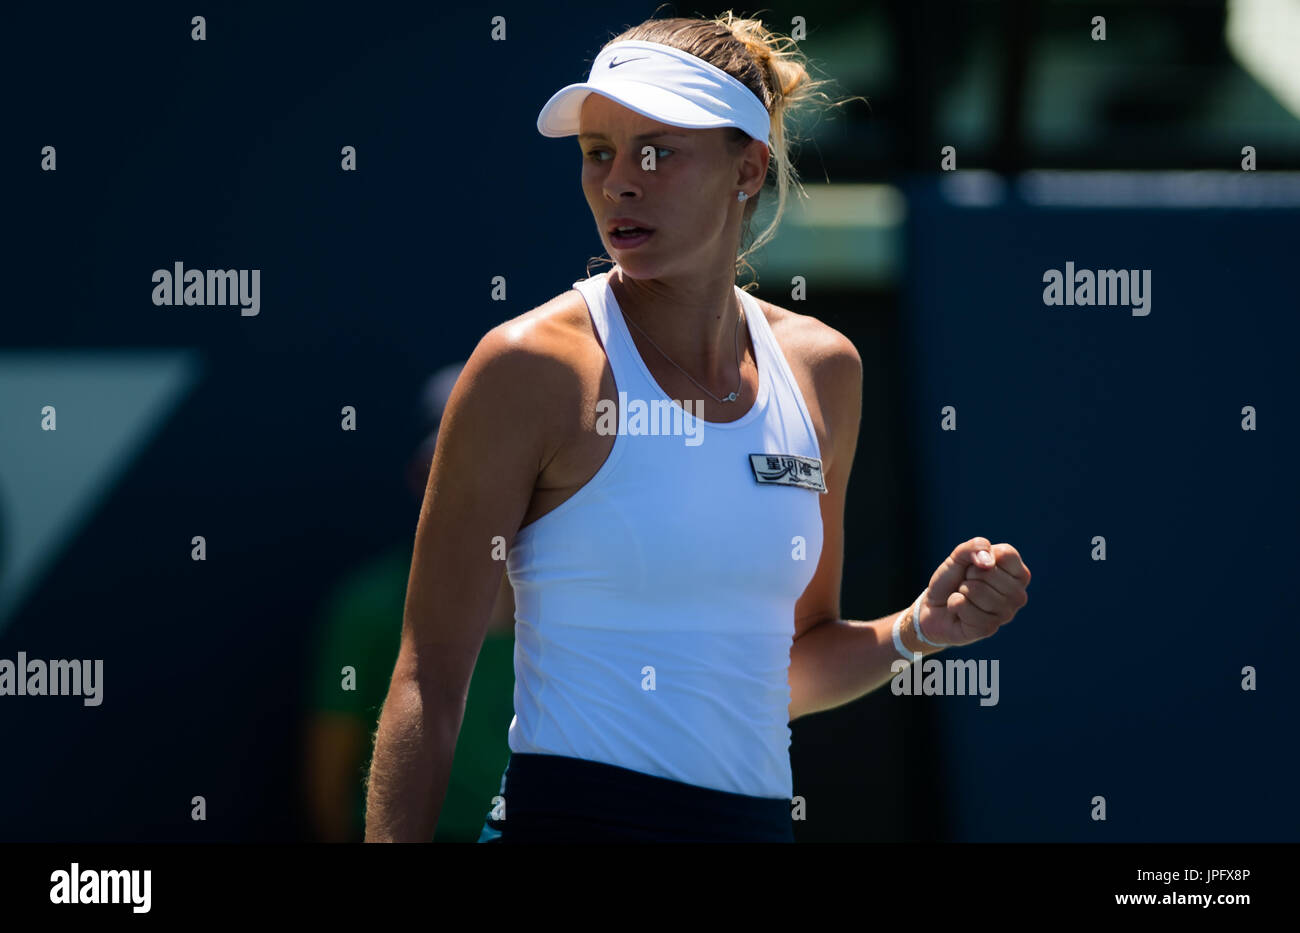 Stanford, United States. 1 August, 2017. Magda Linette of Poland at the  2017 Bank of the West Classic WTA International tennis tournament ©  Jimmie48 Photography/Alamy Live News Stock Photo - Alamy